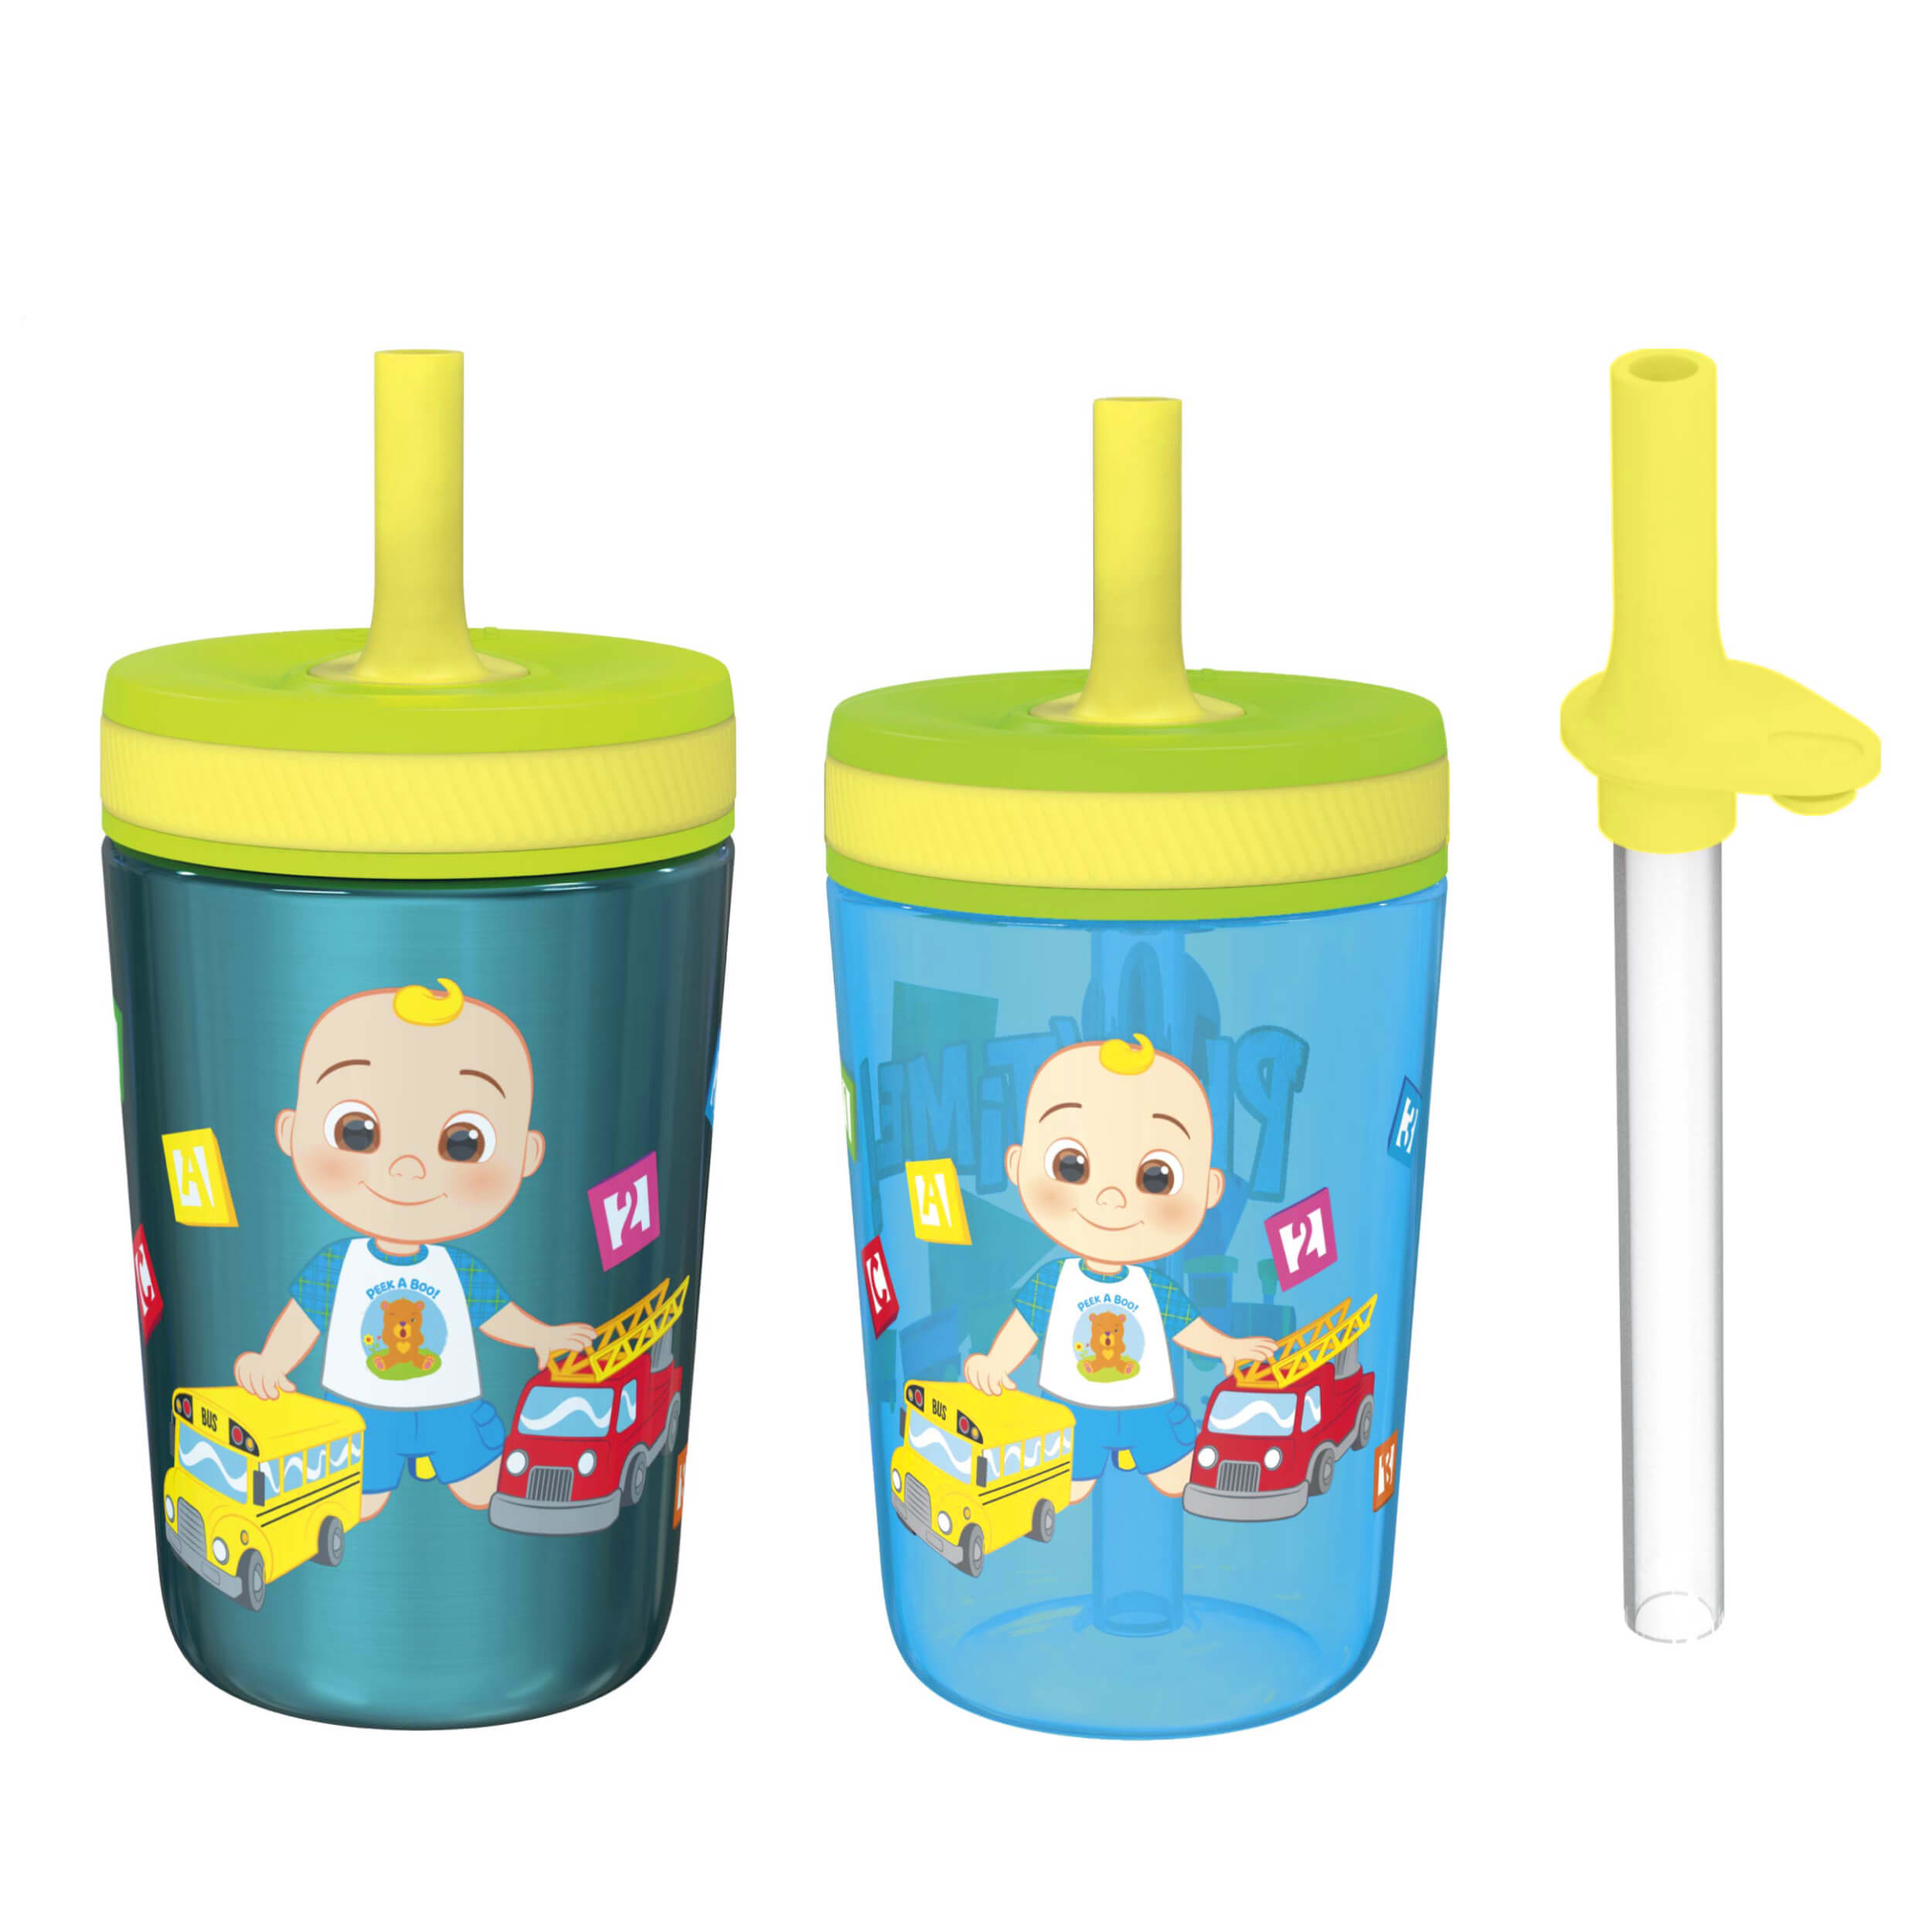  Zak Designs PAW Patrol Kelso Toddler Cups For Travel Or At  Home, 12oz Vacuum Insulated Stainless Steel Sippy Cup